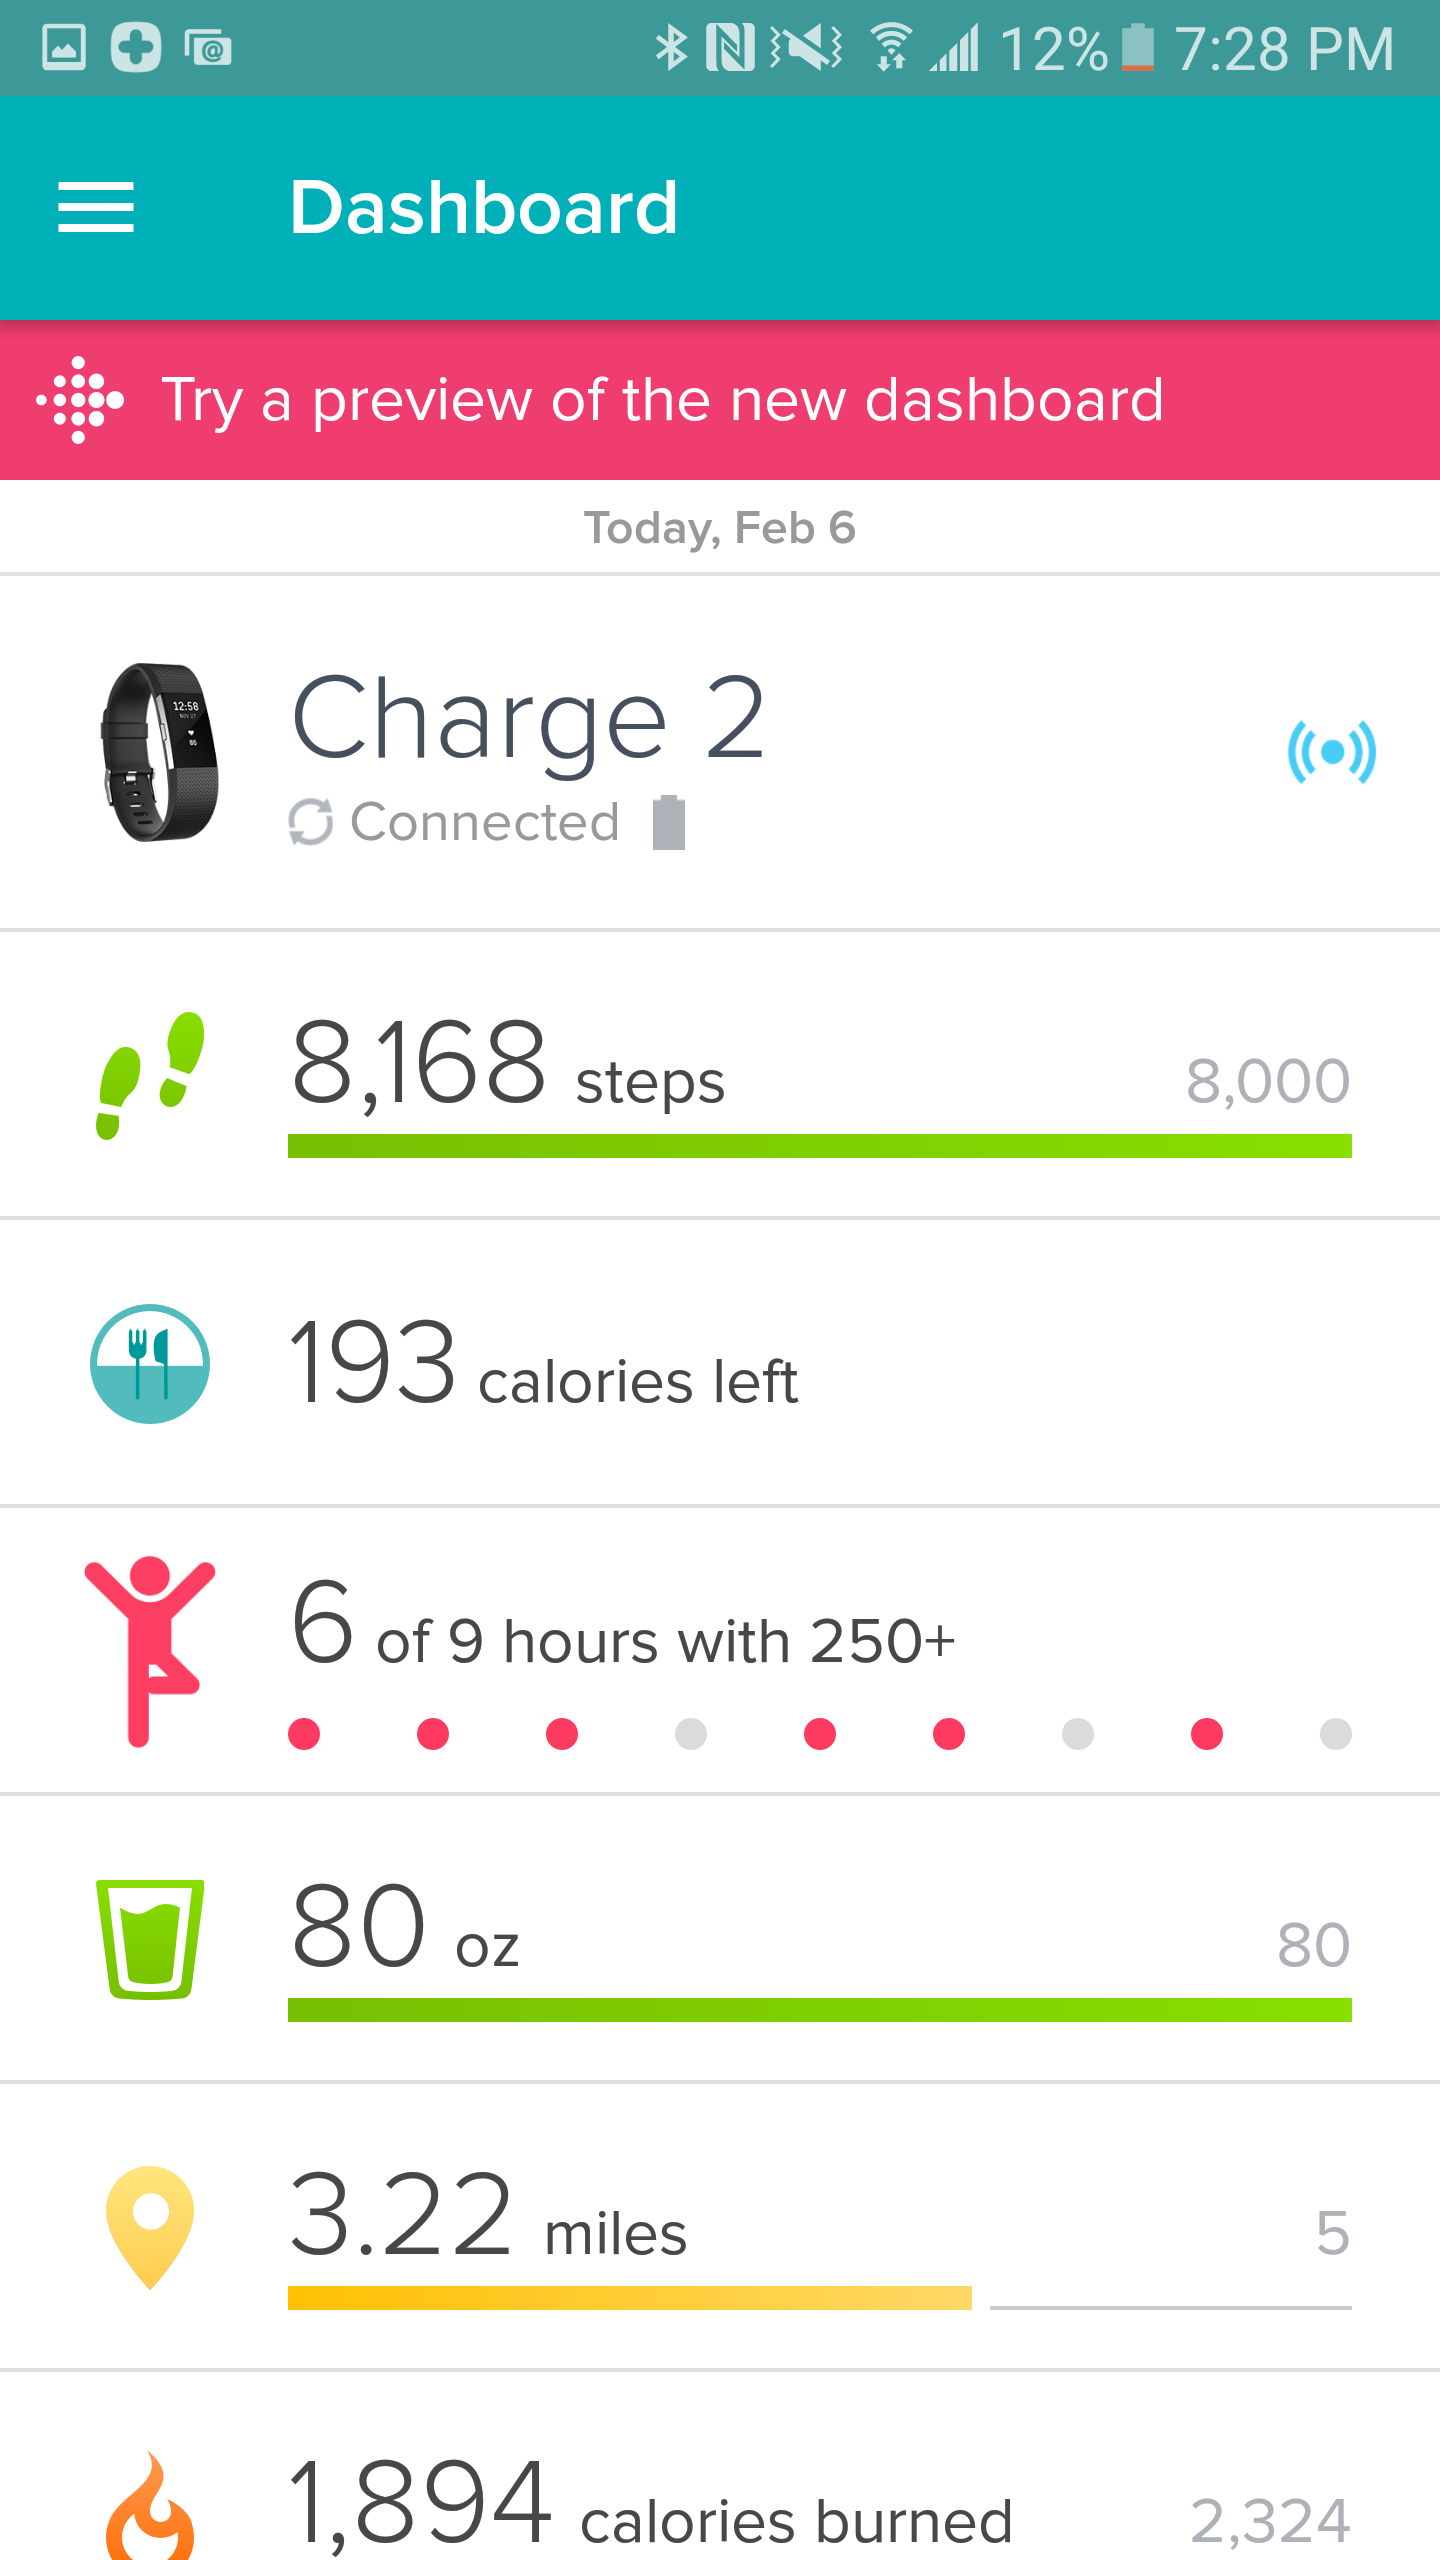 how does fitbit workout calories burned